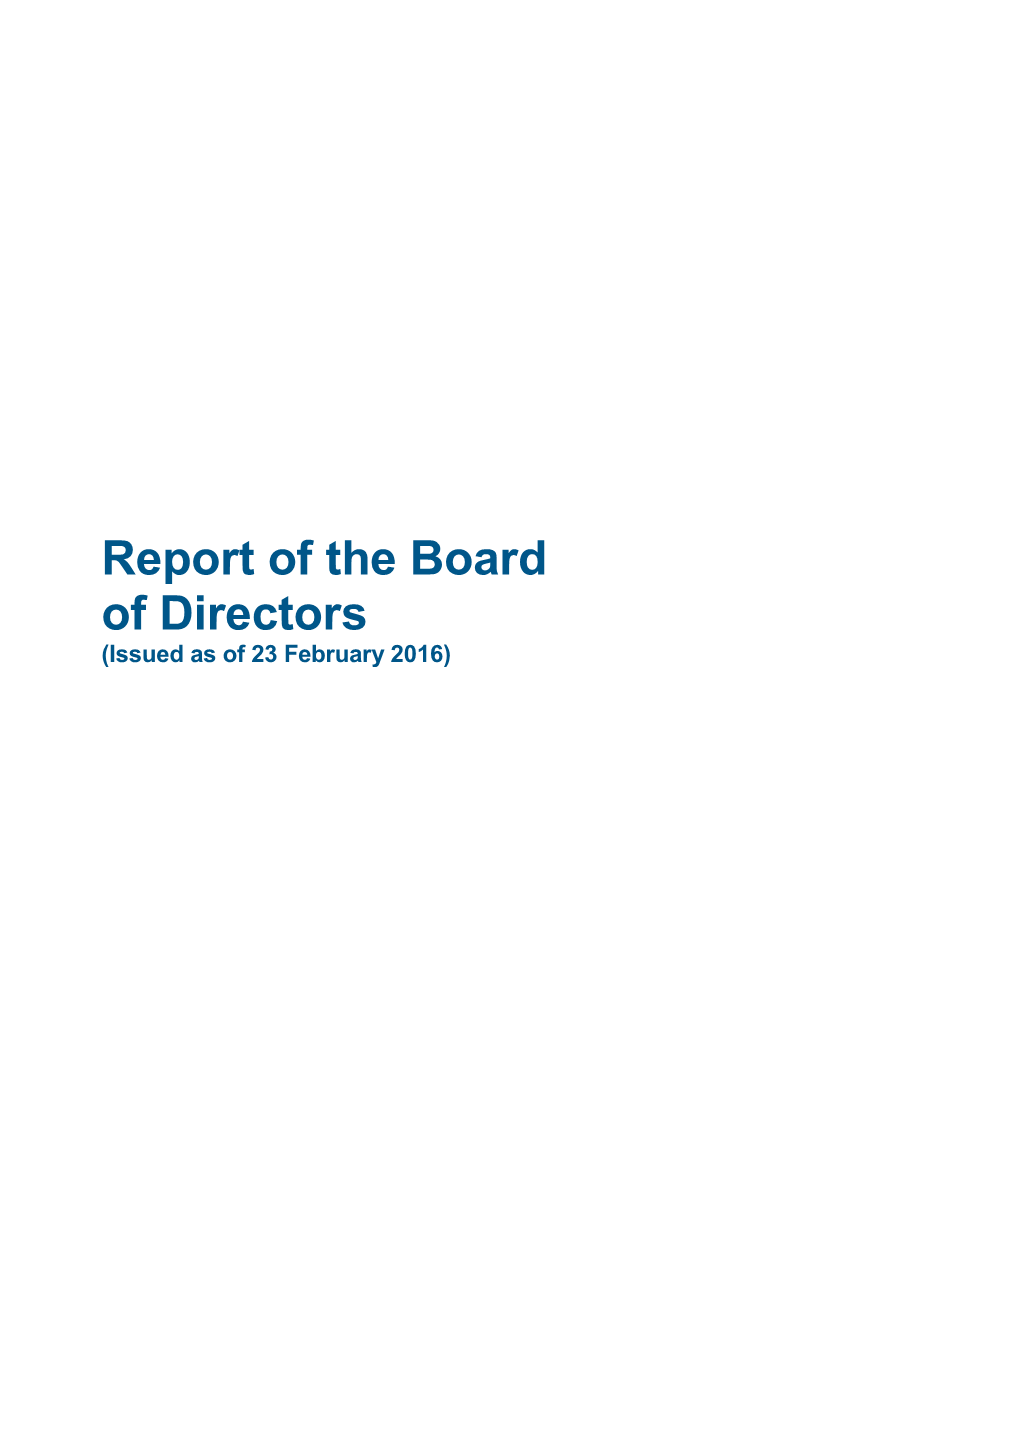 Report of the Board of Directors (Issued As of 23 February 2016)